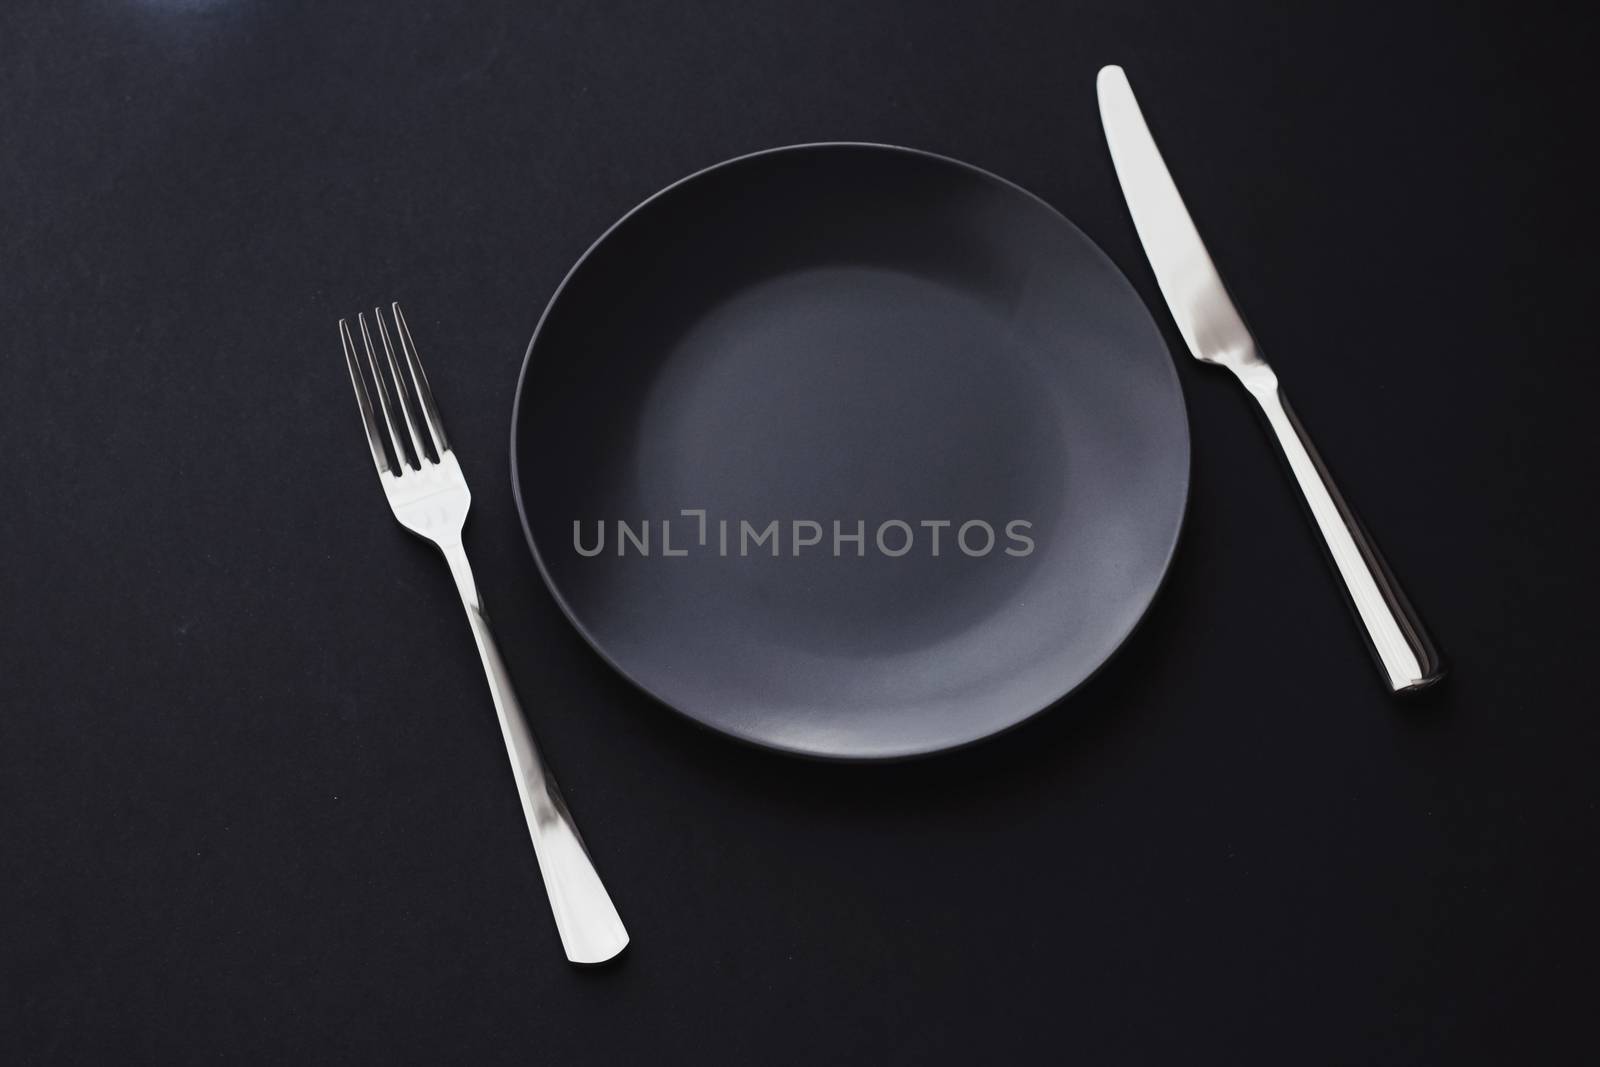 Empty plates and silverware on black background, premium tableware for holiday dinner, minimalistic design and diet by Anneleven